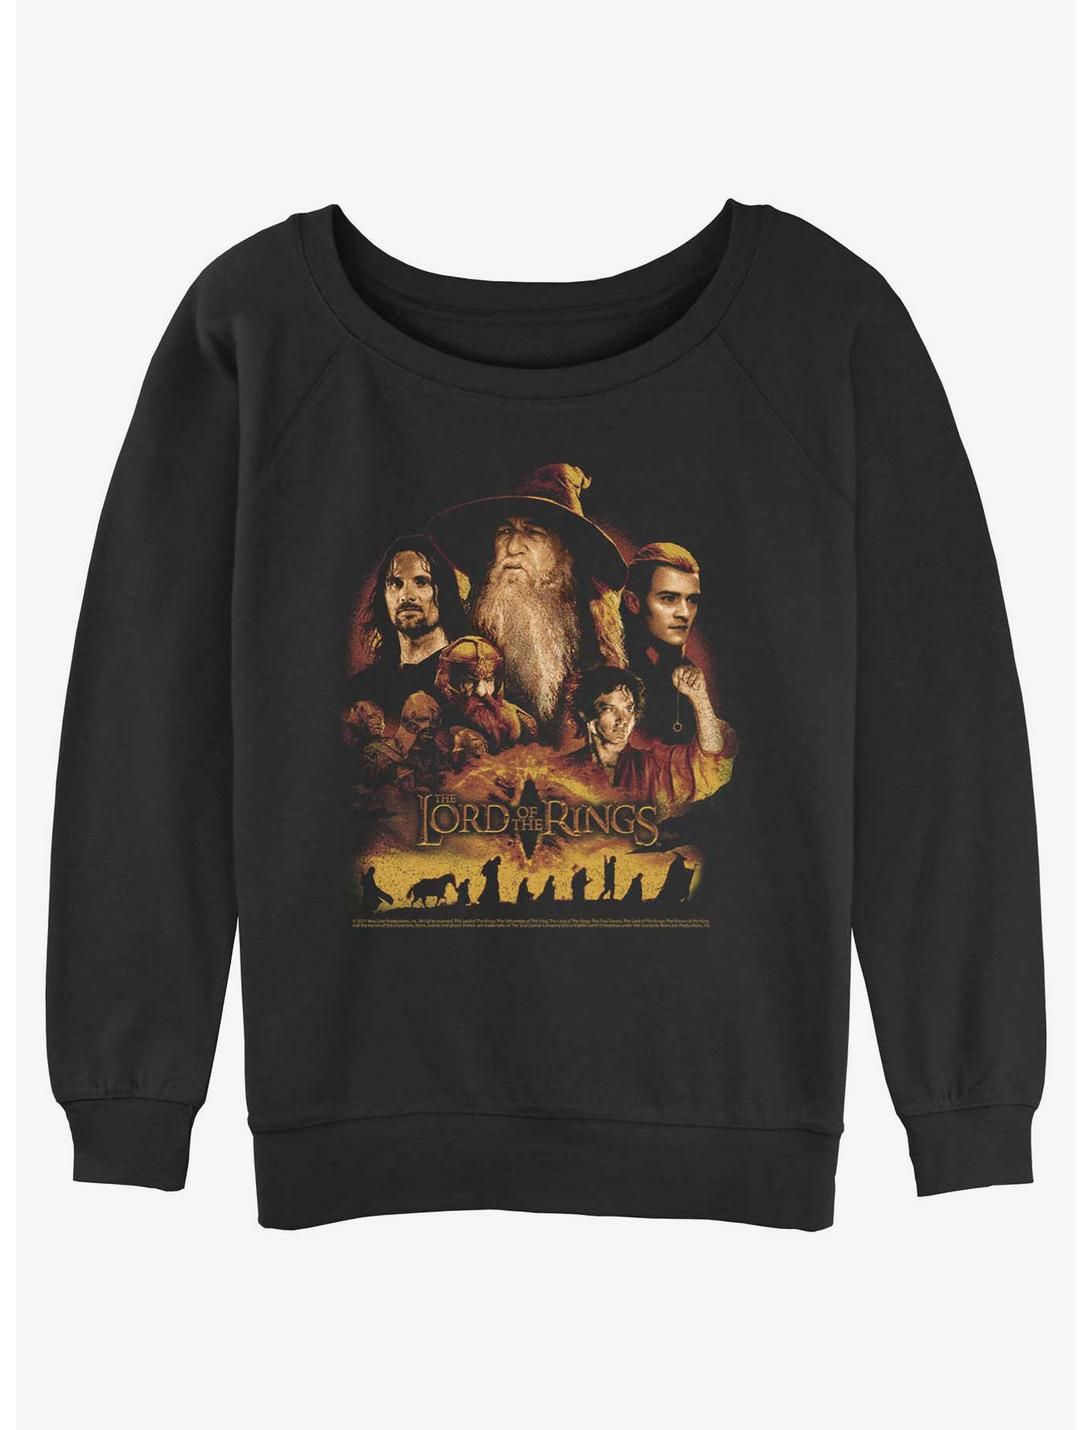 The Lord of the Rings Character Heads Girls Slouchy Sweatshirt, BLACK, hi-res